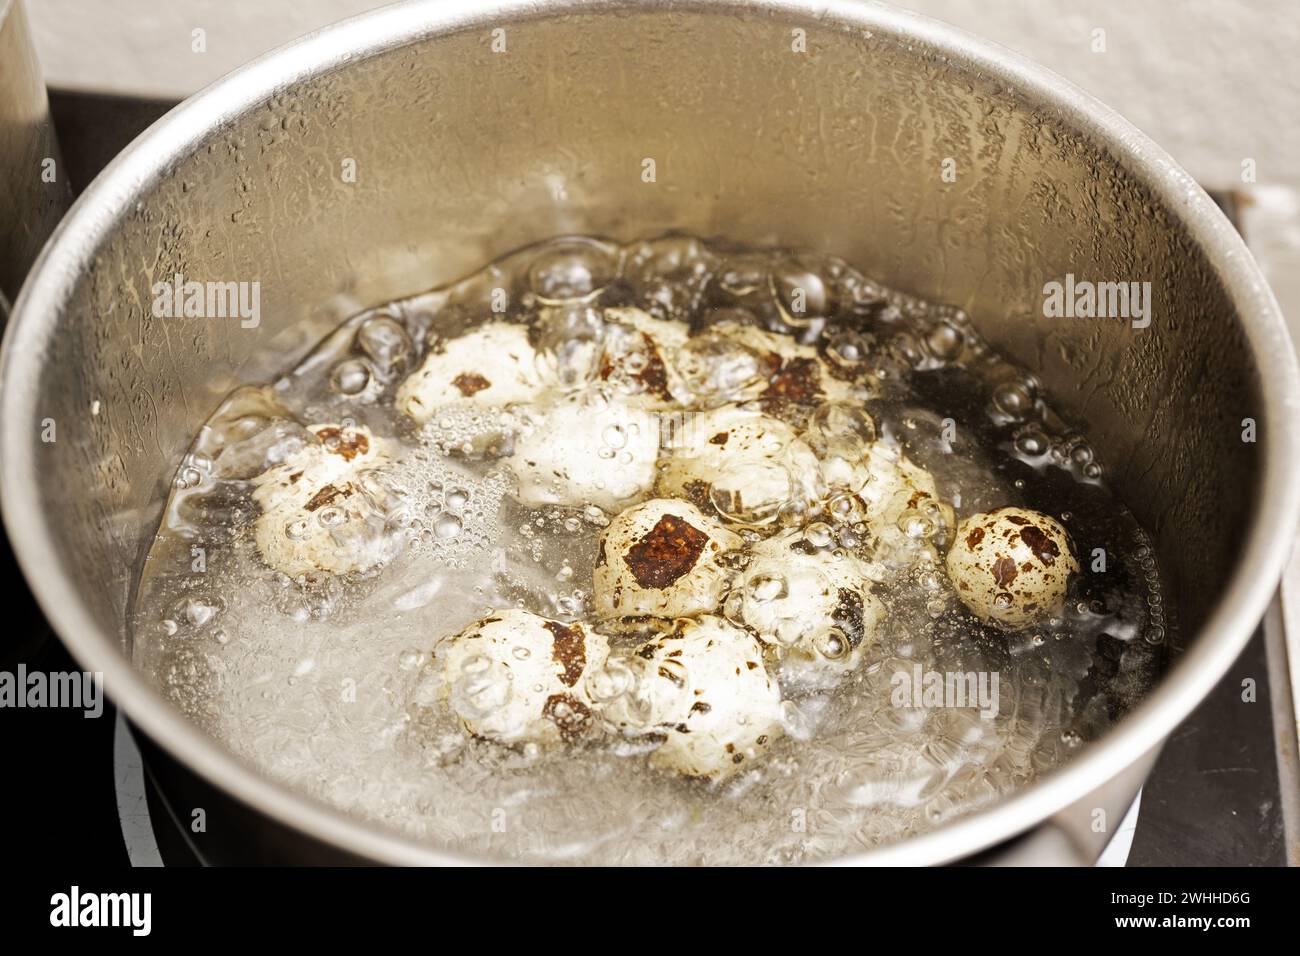 Quail eggs are cooked in boiling water in a stainless steel pot of for a gourmet dish, copy space, selected focus Stock Photo